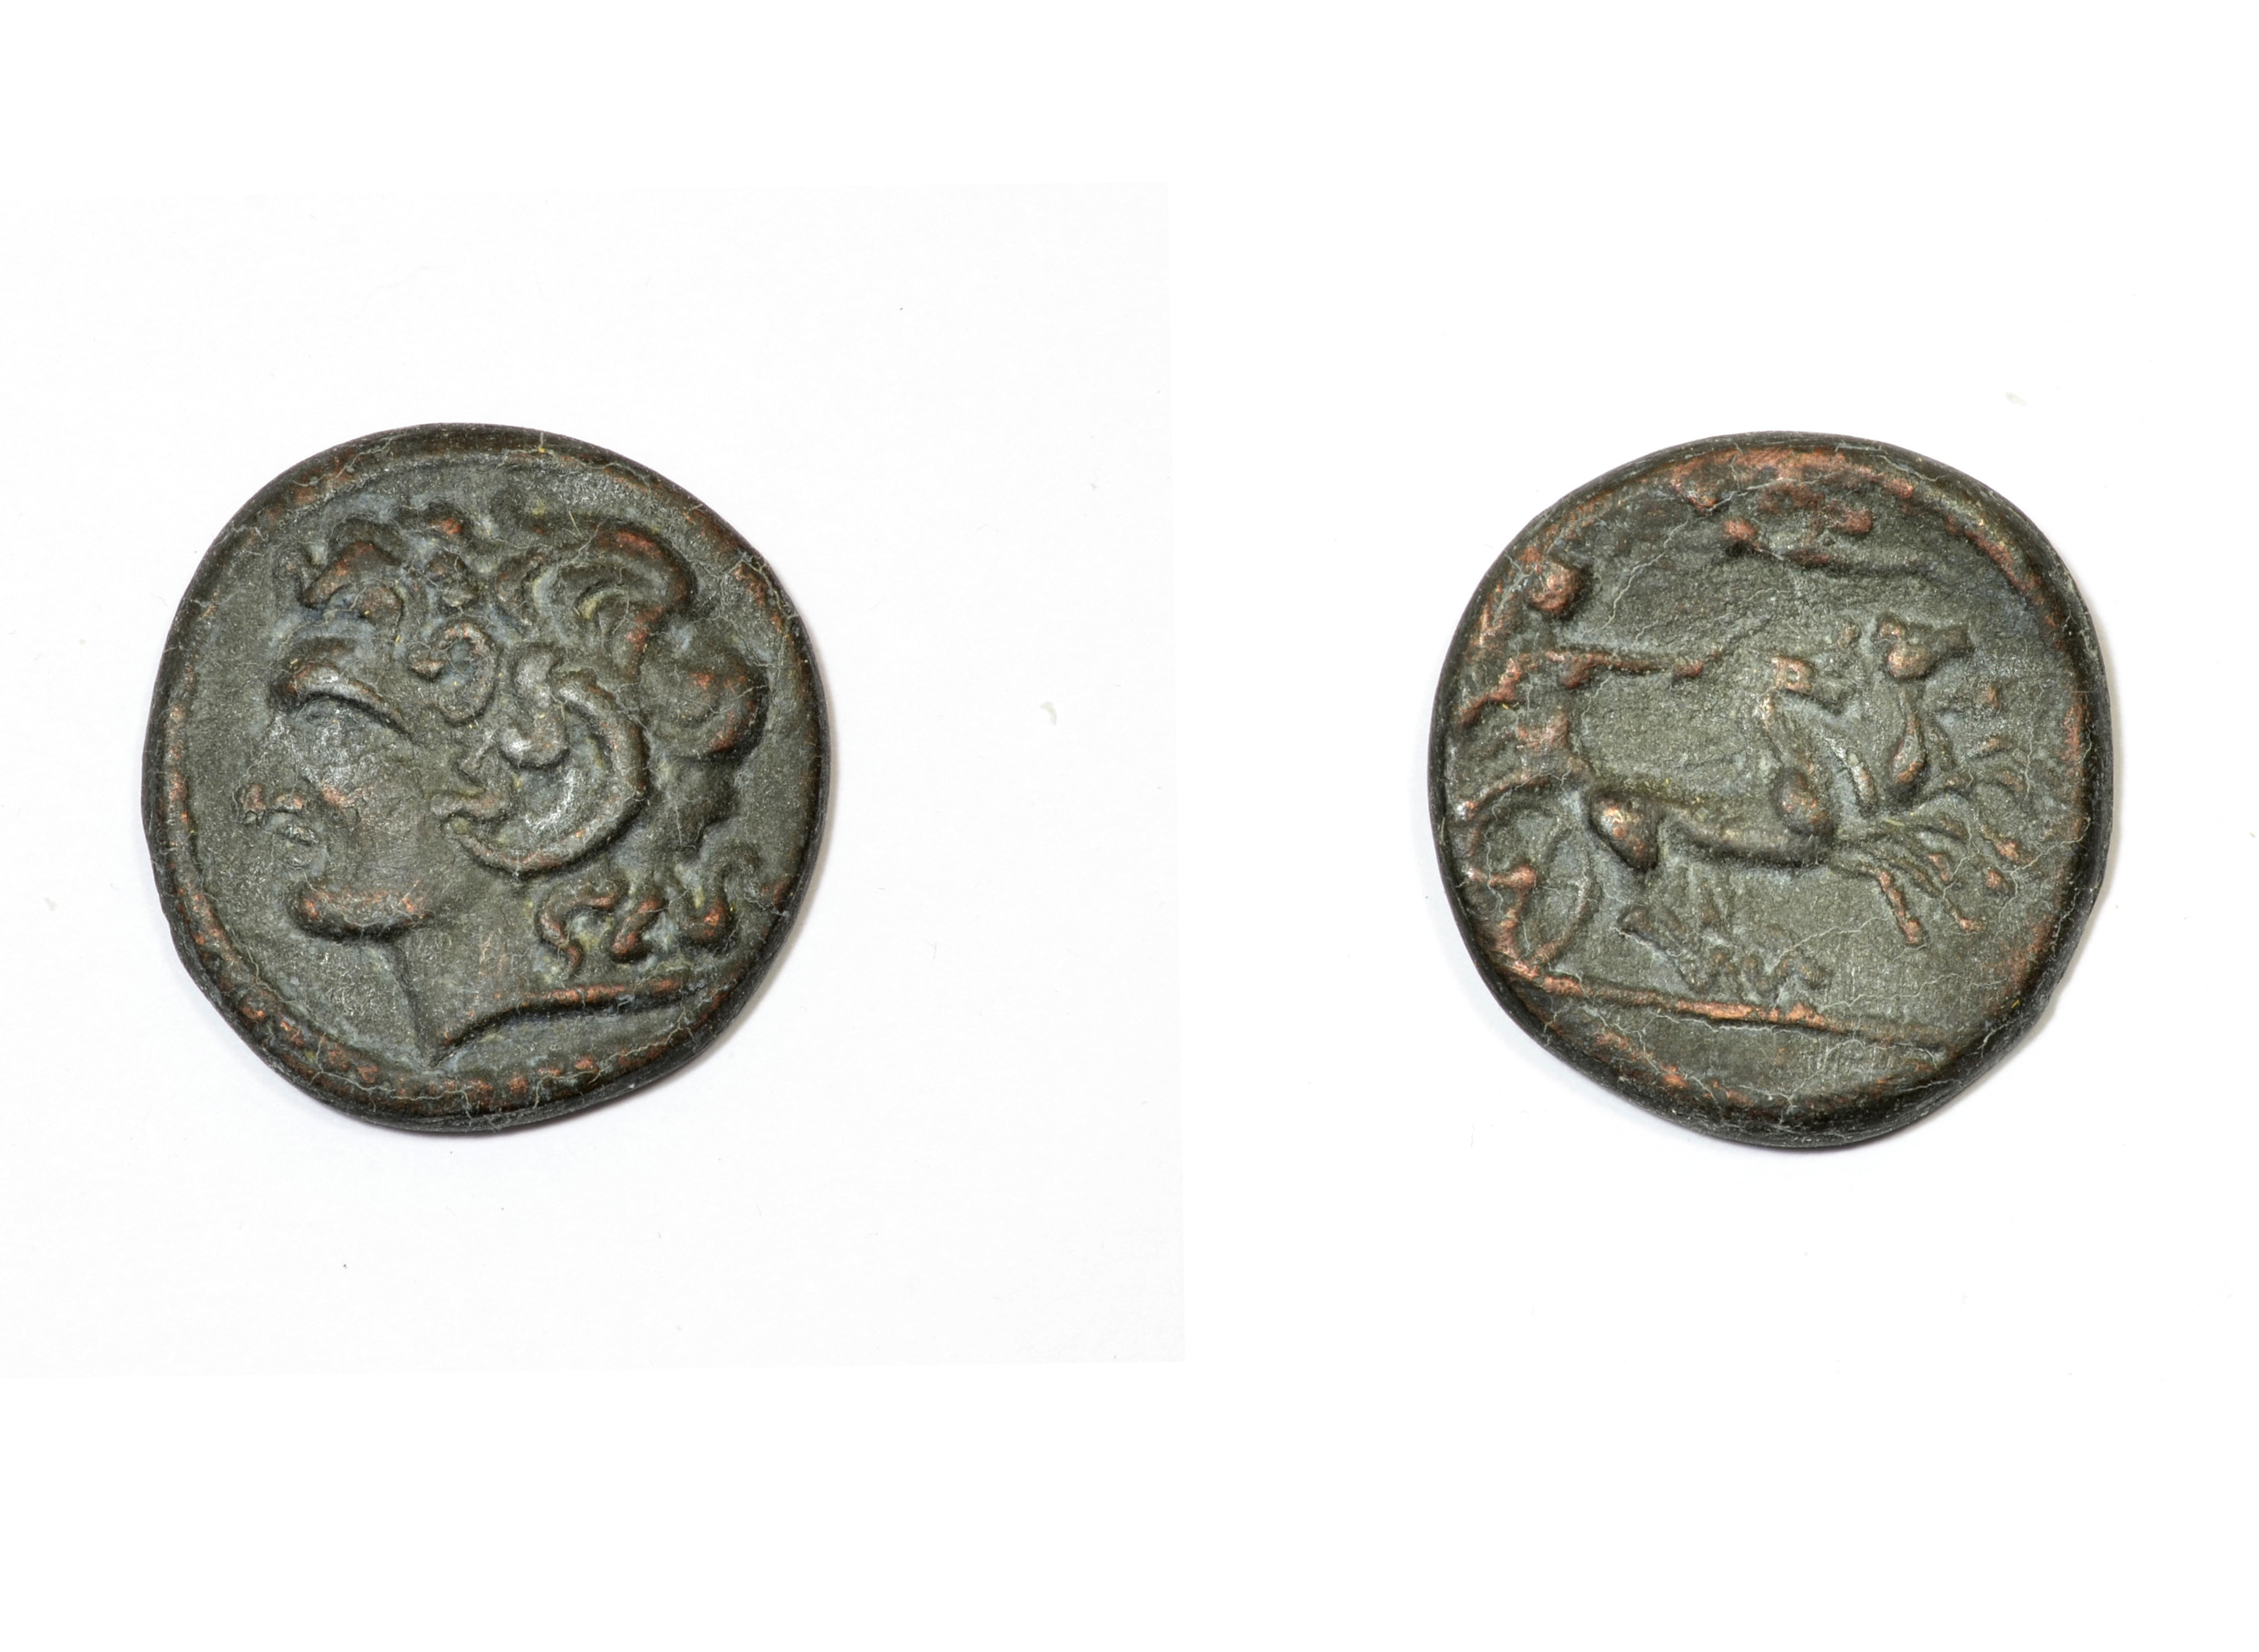 Ancient Greek coin. Alexander the Great and Apollo with the chariot of the sun. Image courtesy of Adobe Stock.